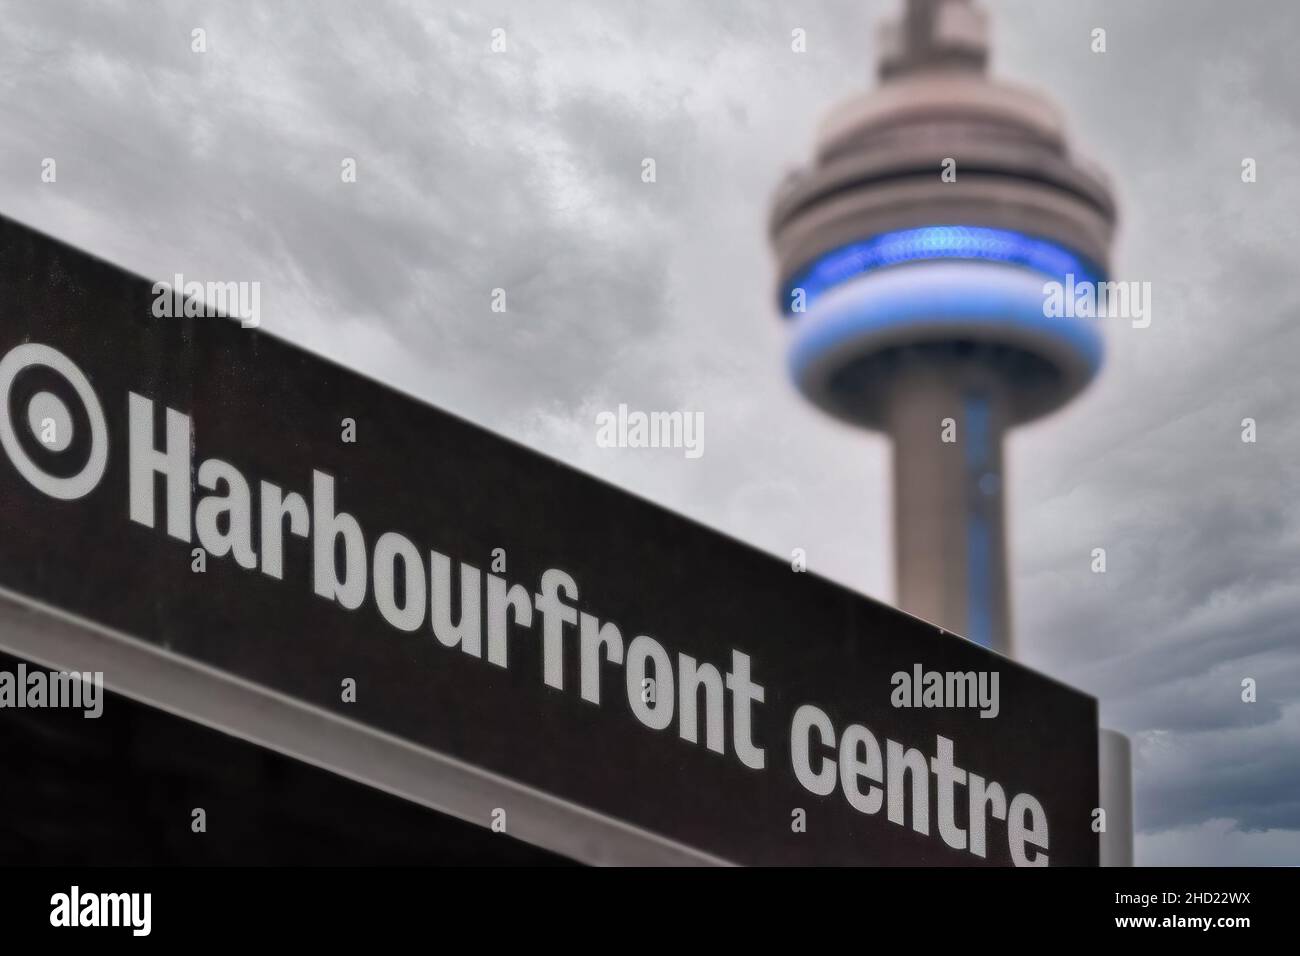 The CN Tower illuminated in blue and framed in a sign for the Harbourfront Centre. Jan. 2, 2022 Stock Photo